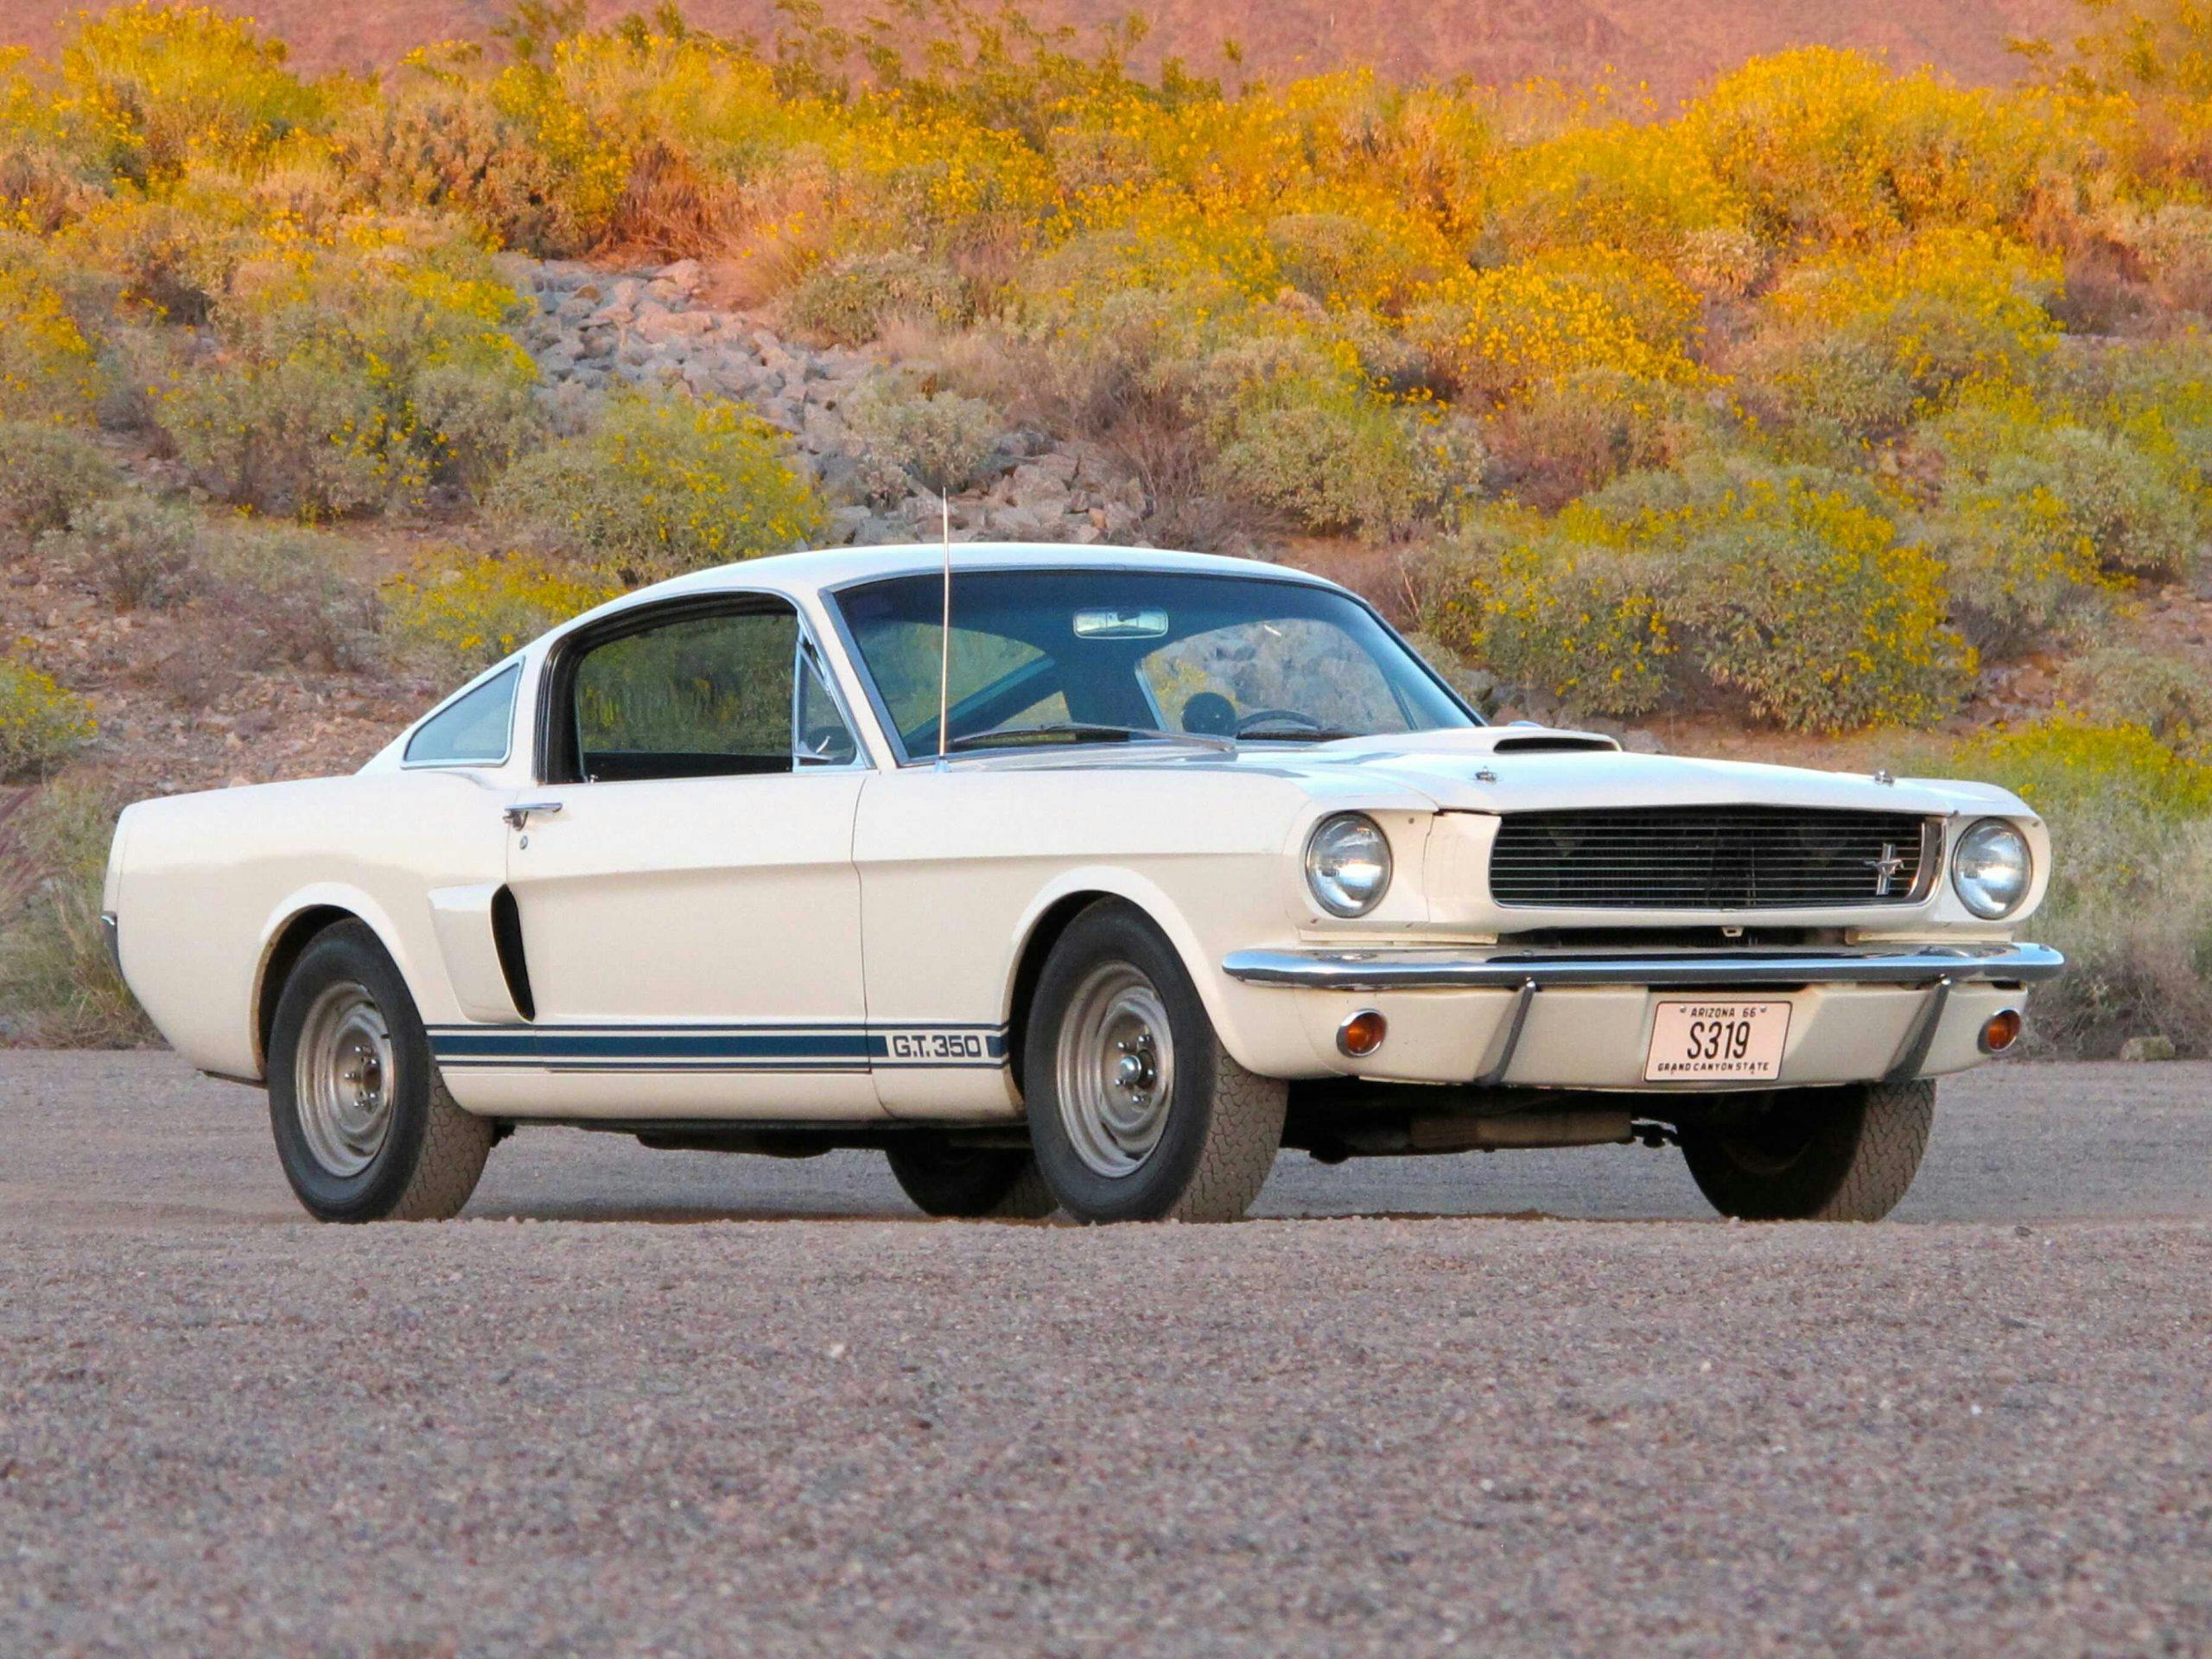 A Brief History of Shelby Cars